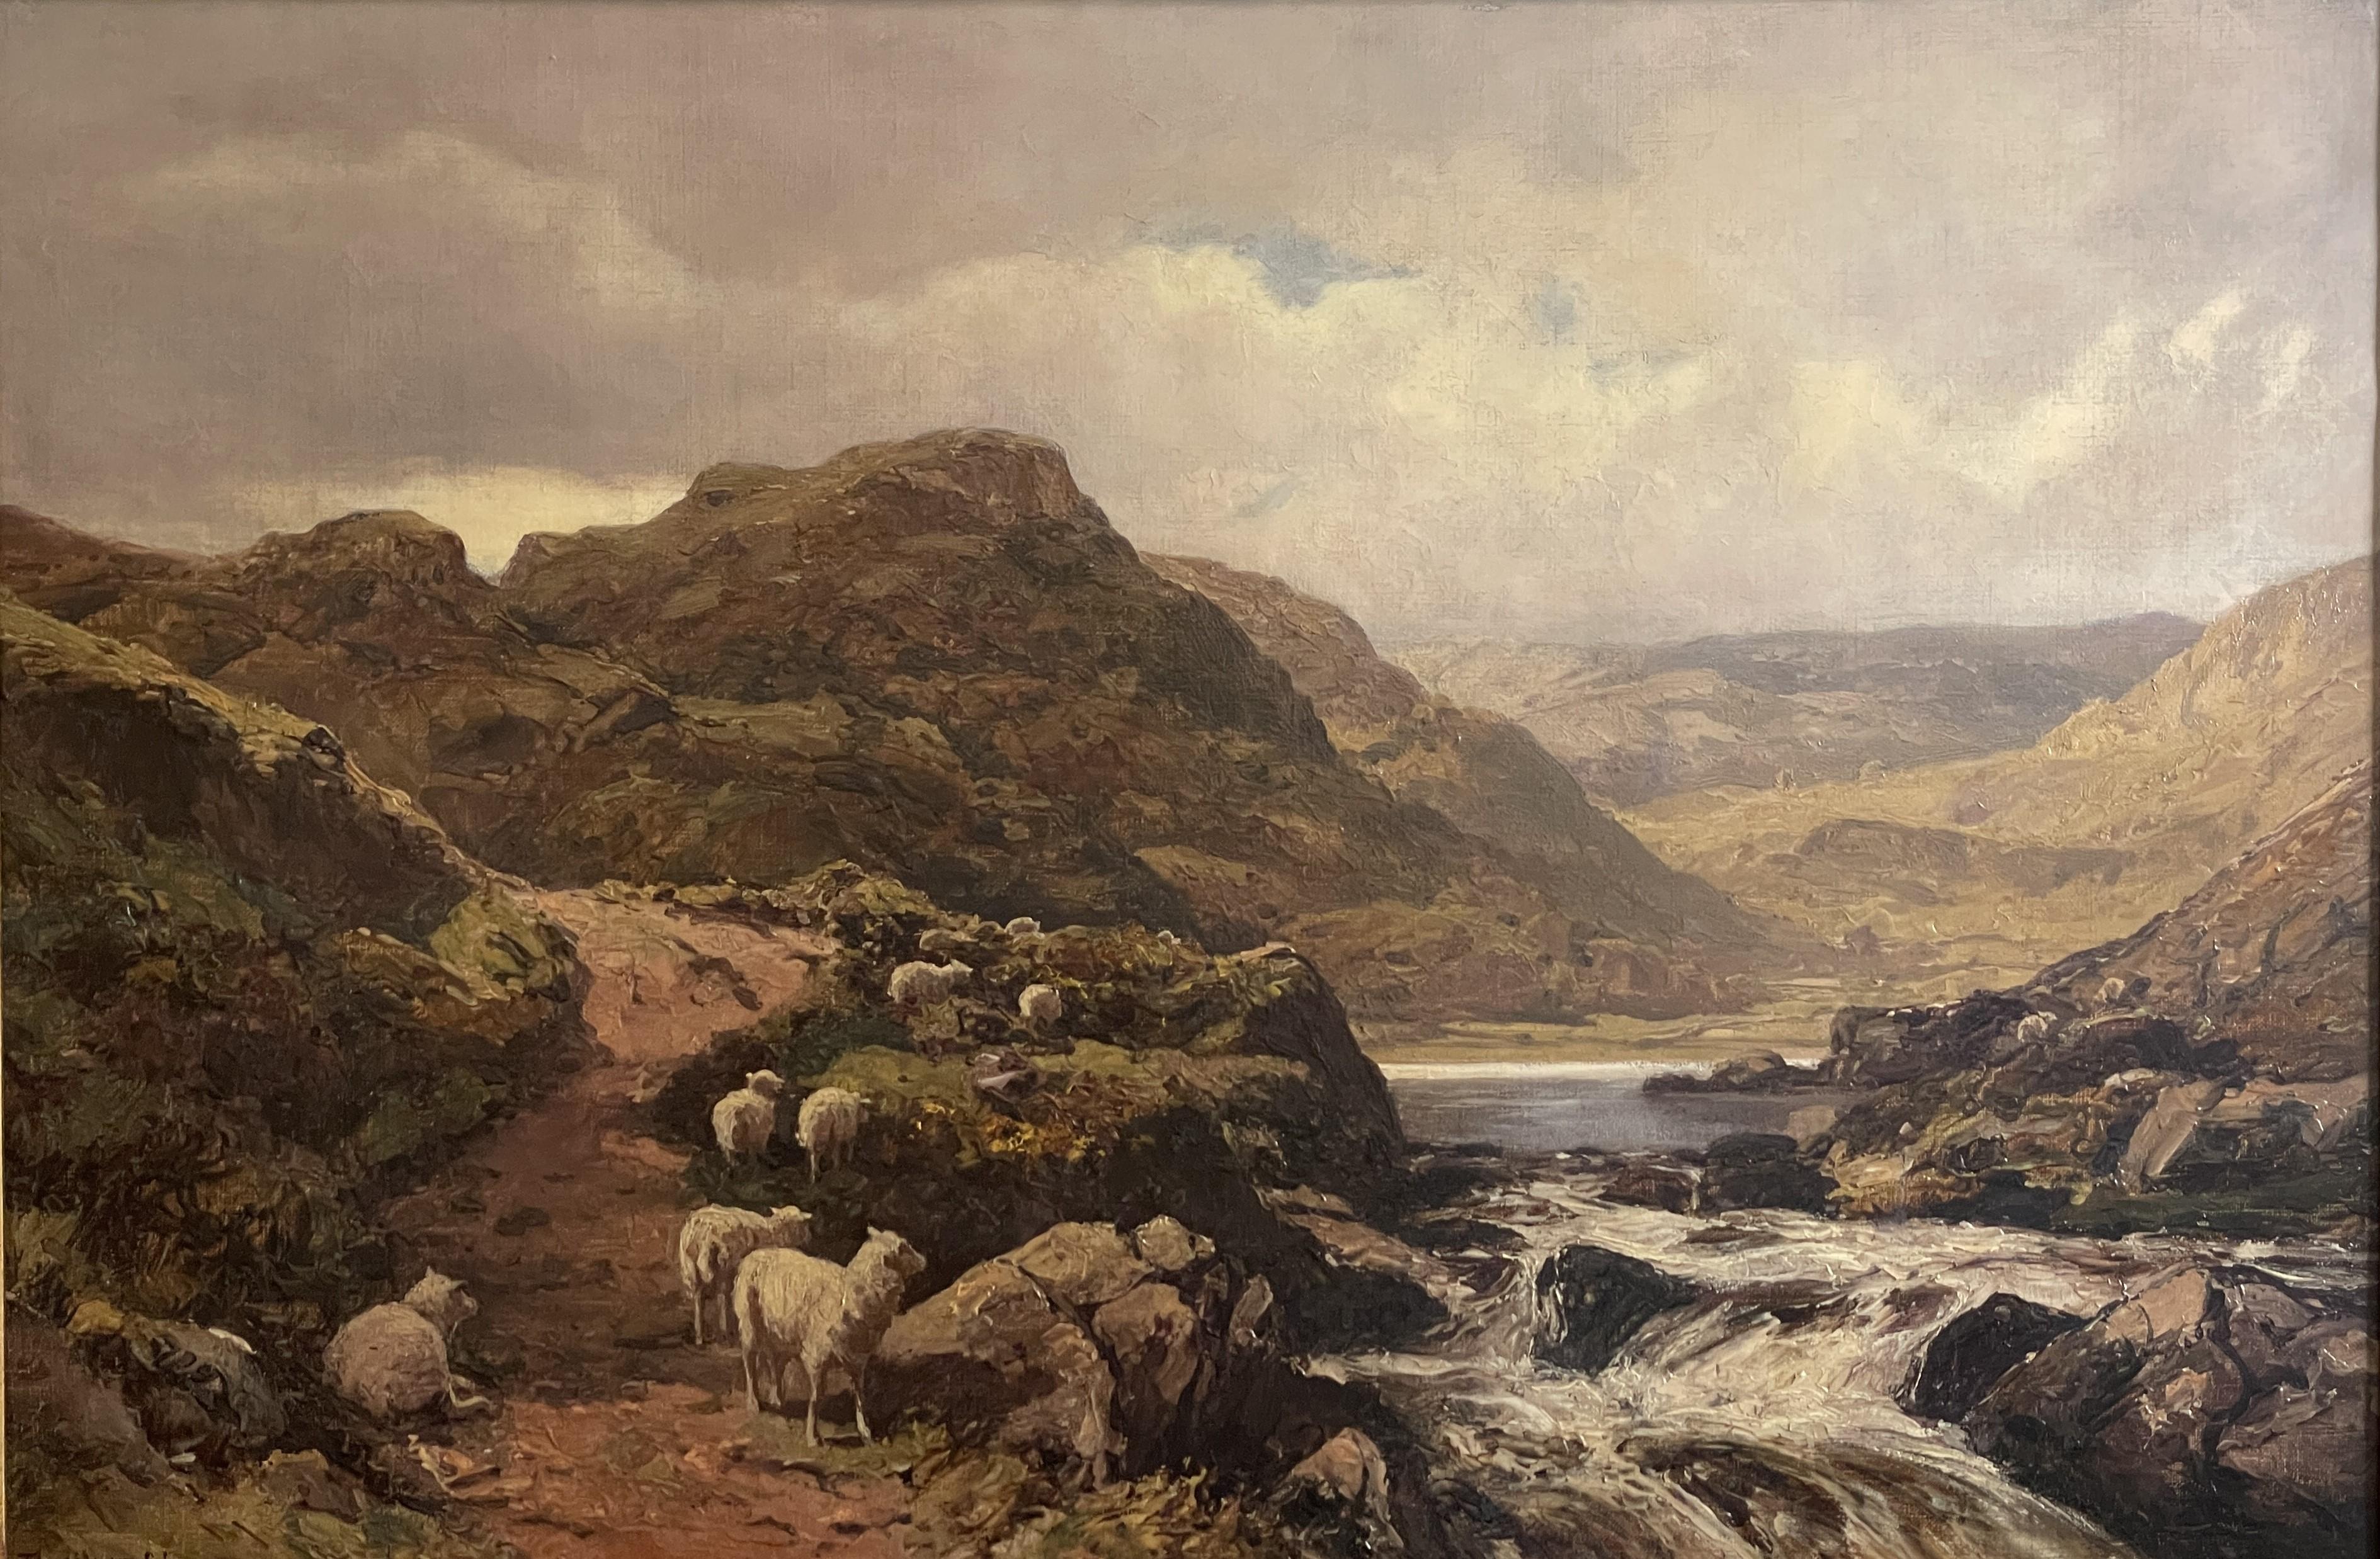 Lyn Crafnant, Wales and Wales, N Wales